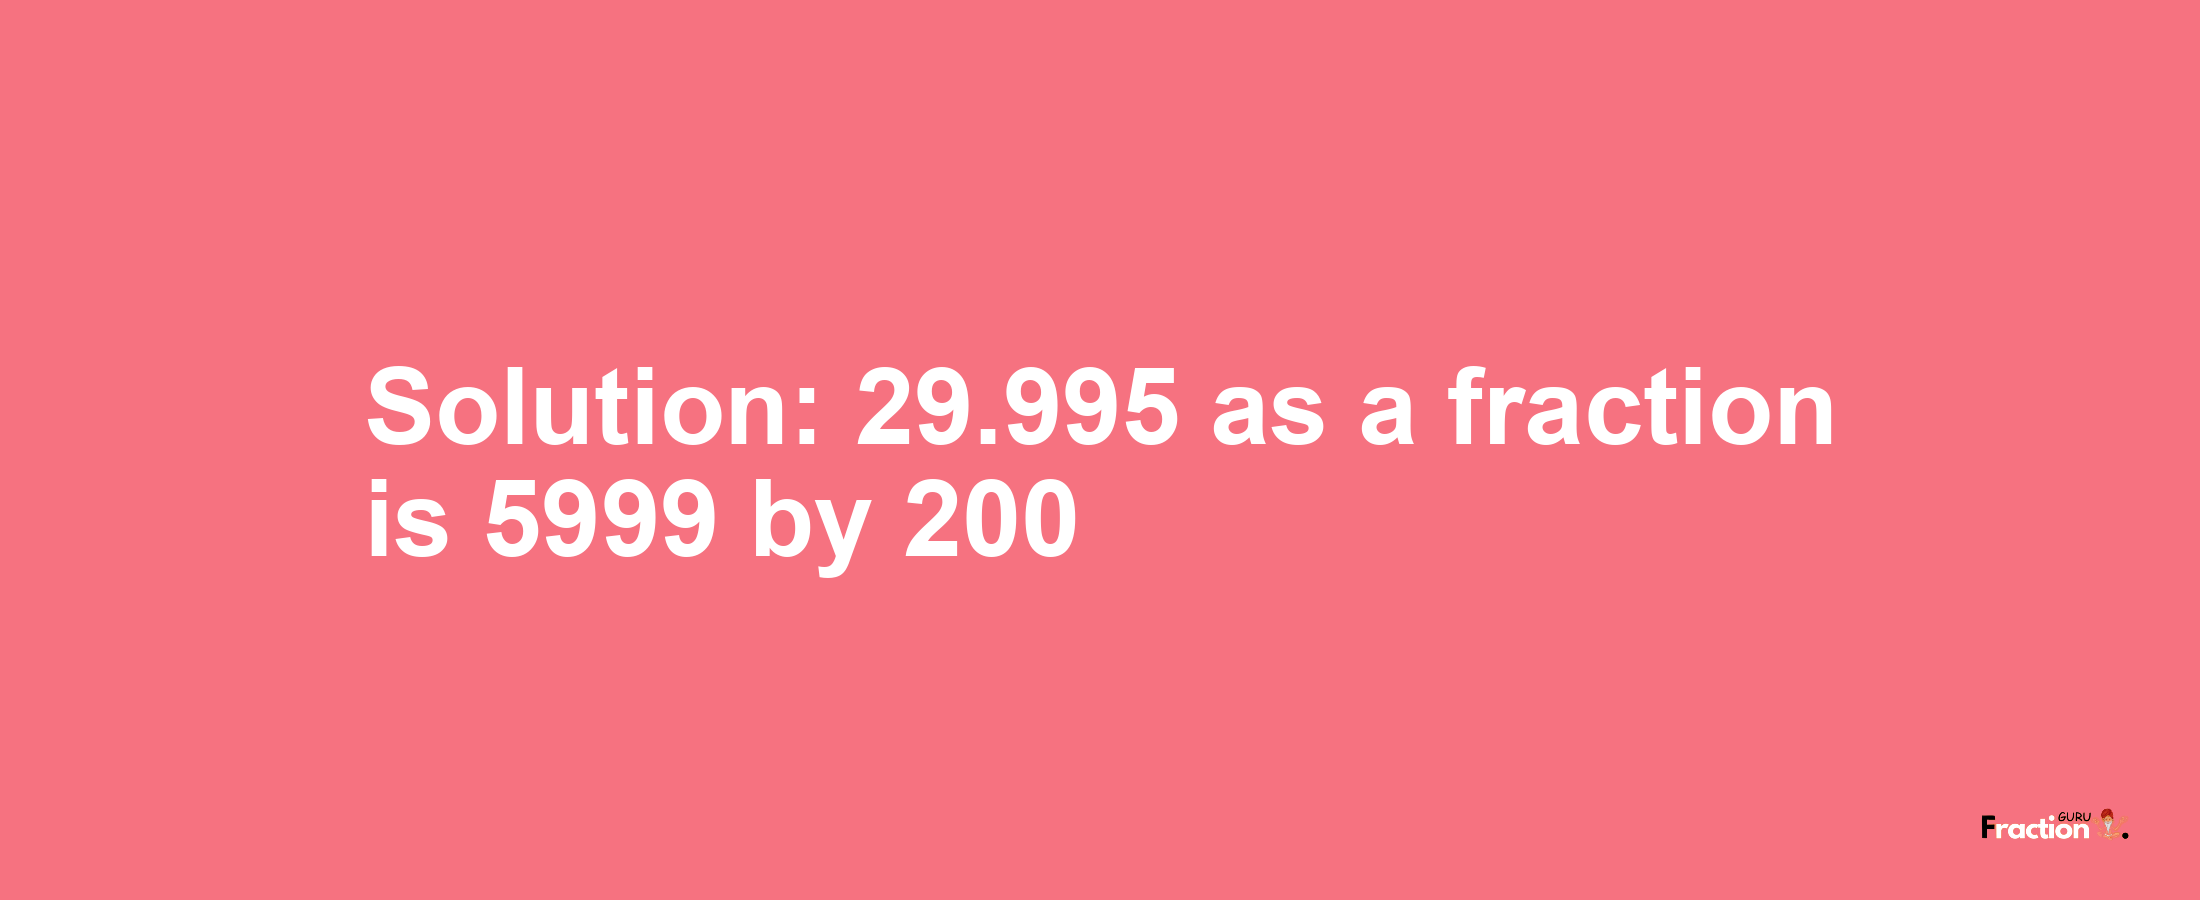 Solution:29.995 as a fraction is 5999/200